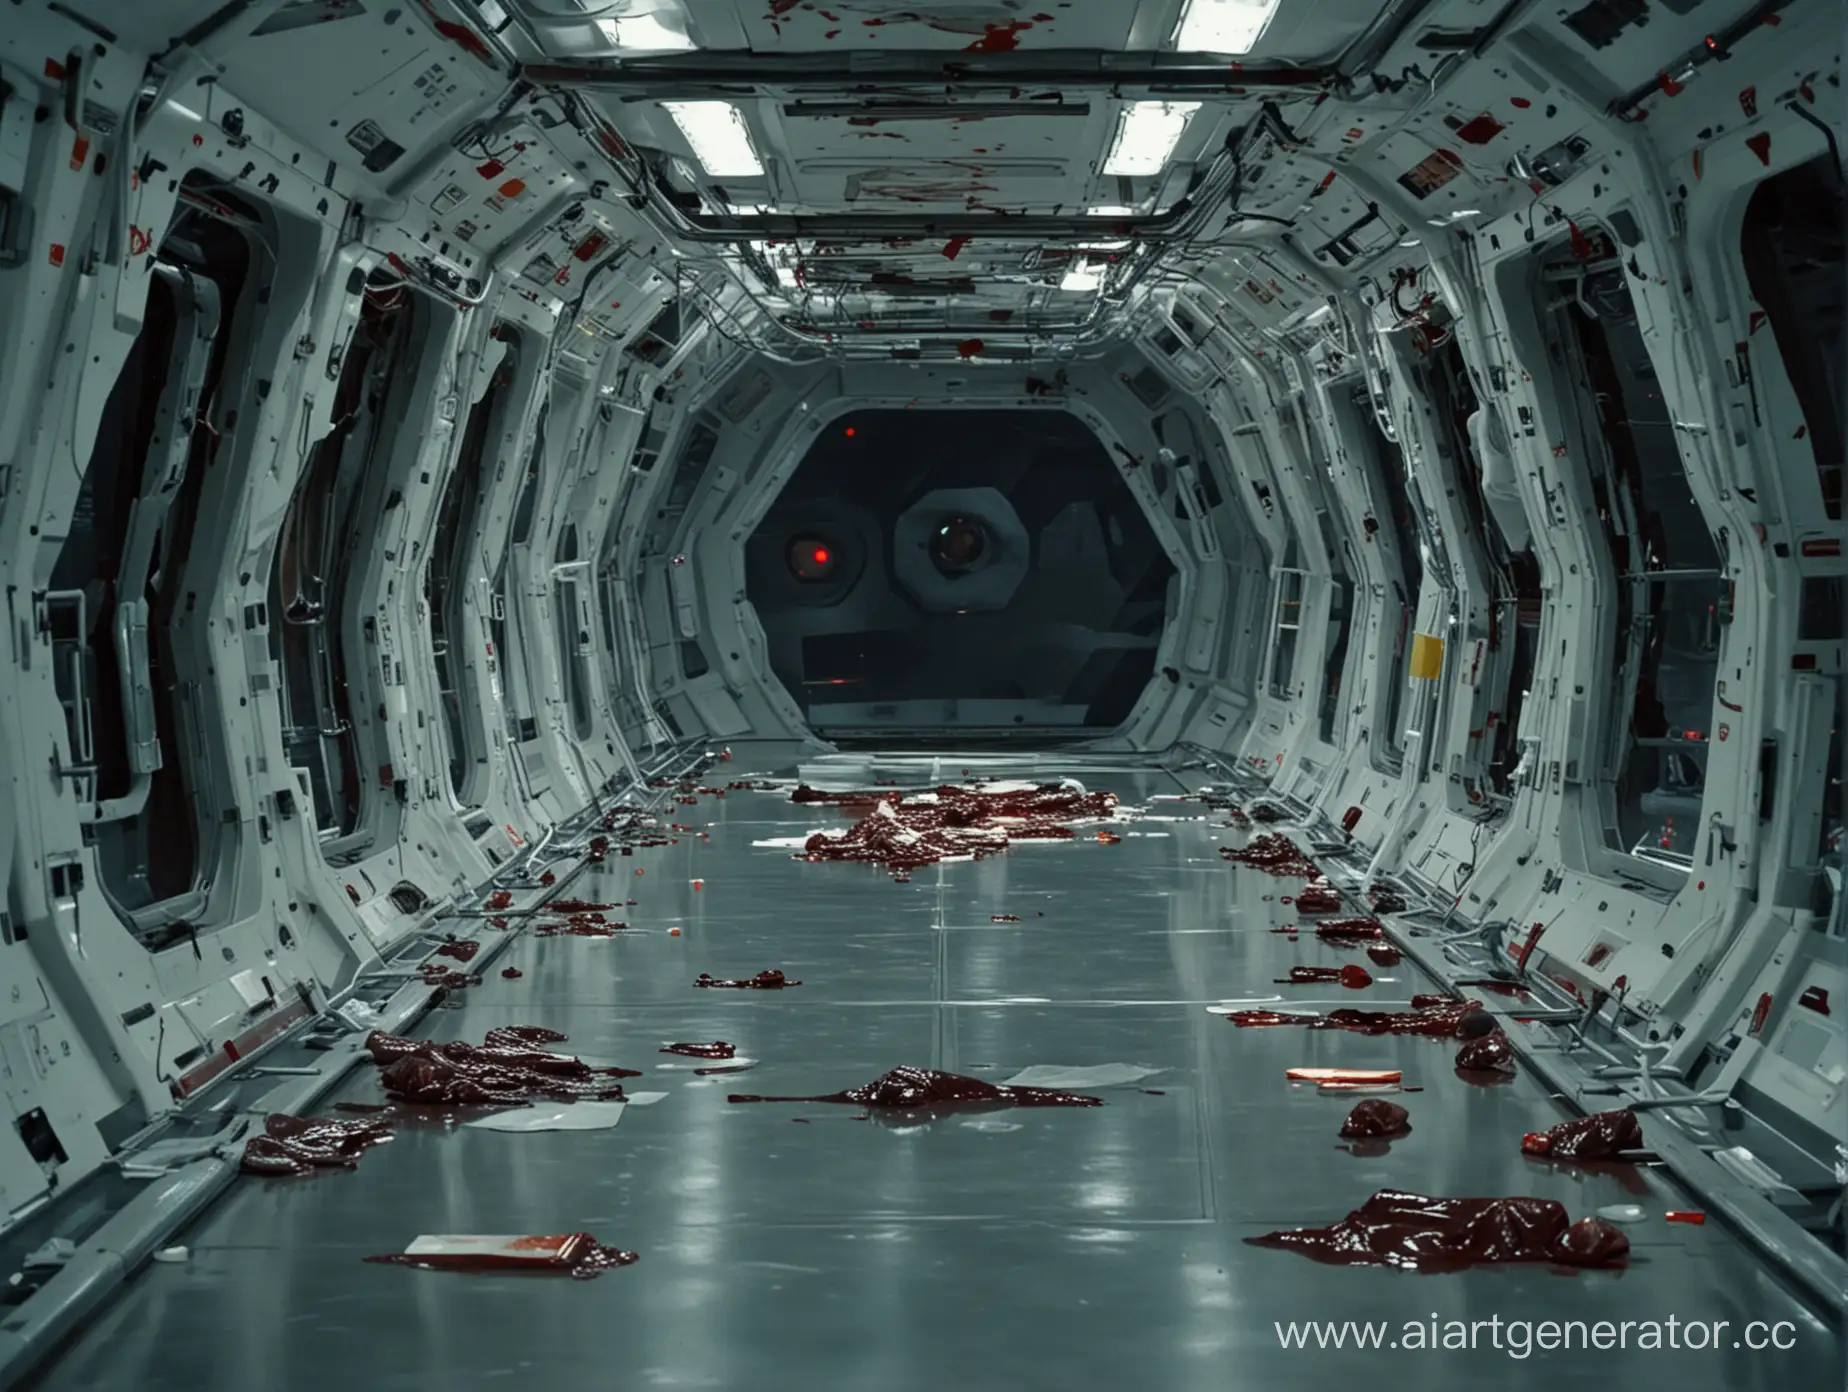 Gruesome-Scene-Inside-Spaceship-Laboratory-with-Blood-and-Corpses